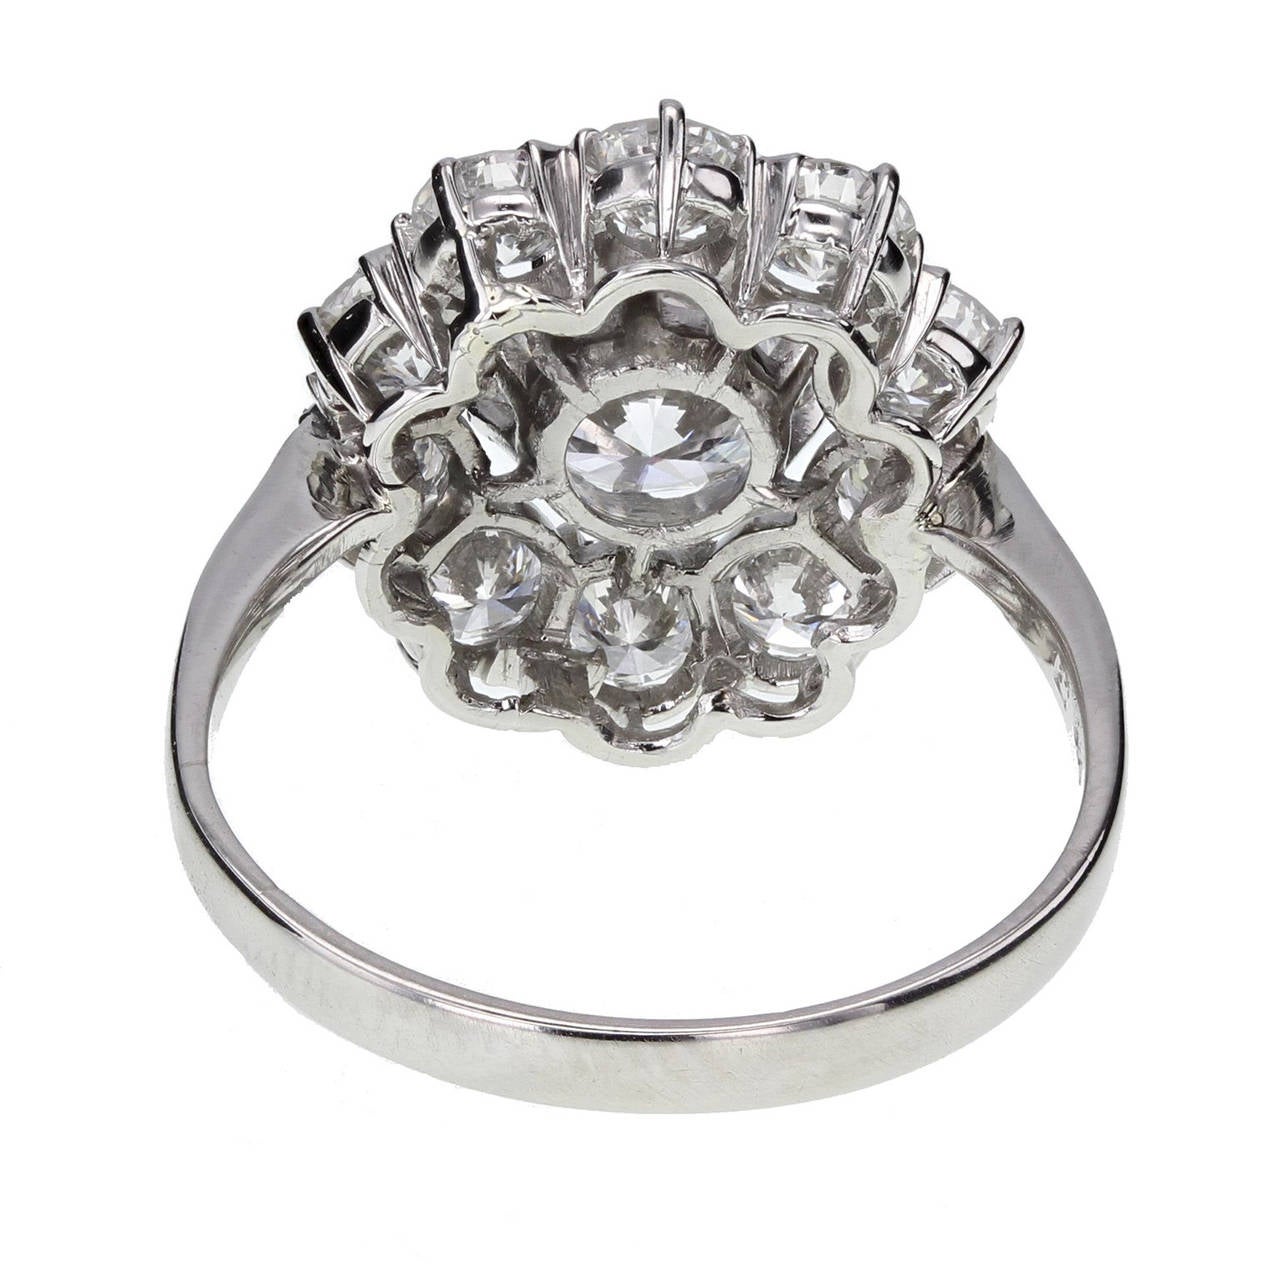 Women's Internally Flawless D Colour Diamond Daisy Cluster Ring with HRD Certificate